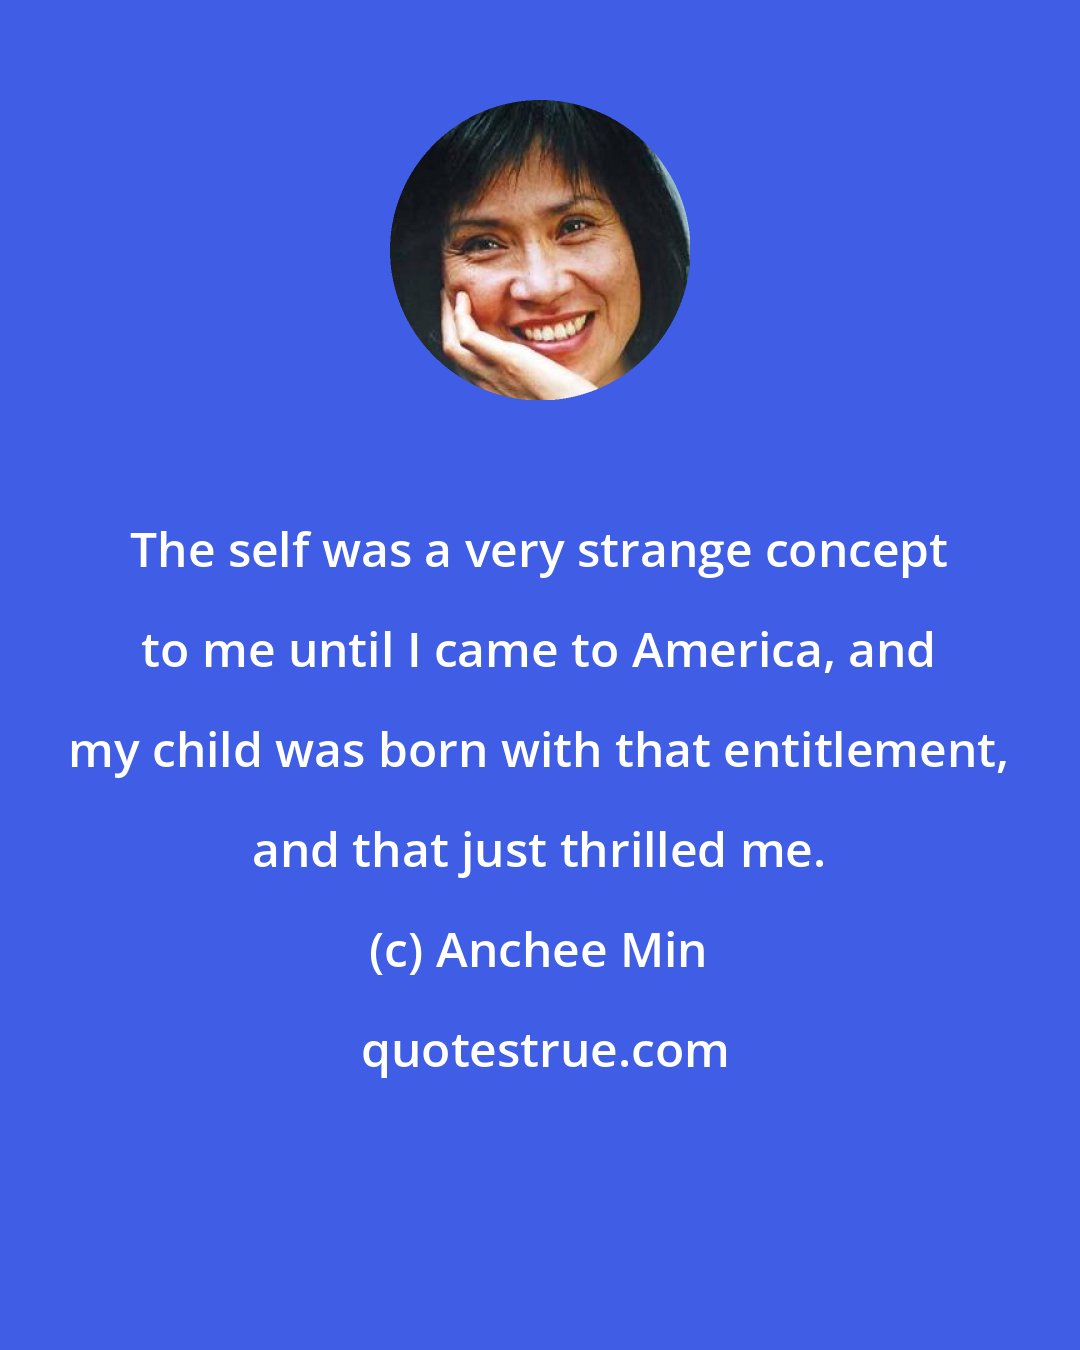 Anchee Min: The self was a very strange concept to me until I came to America, and my child was born with that entitlement, and that just thrilled me.